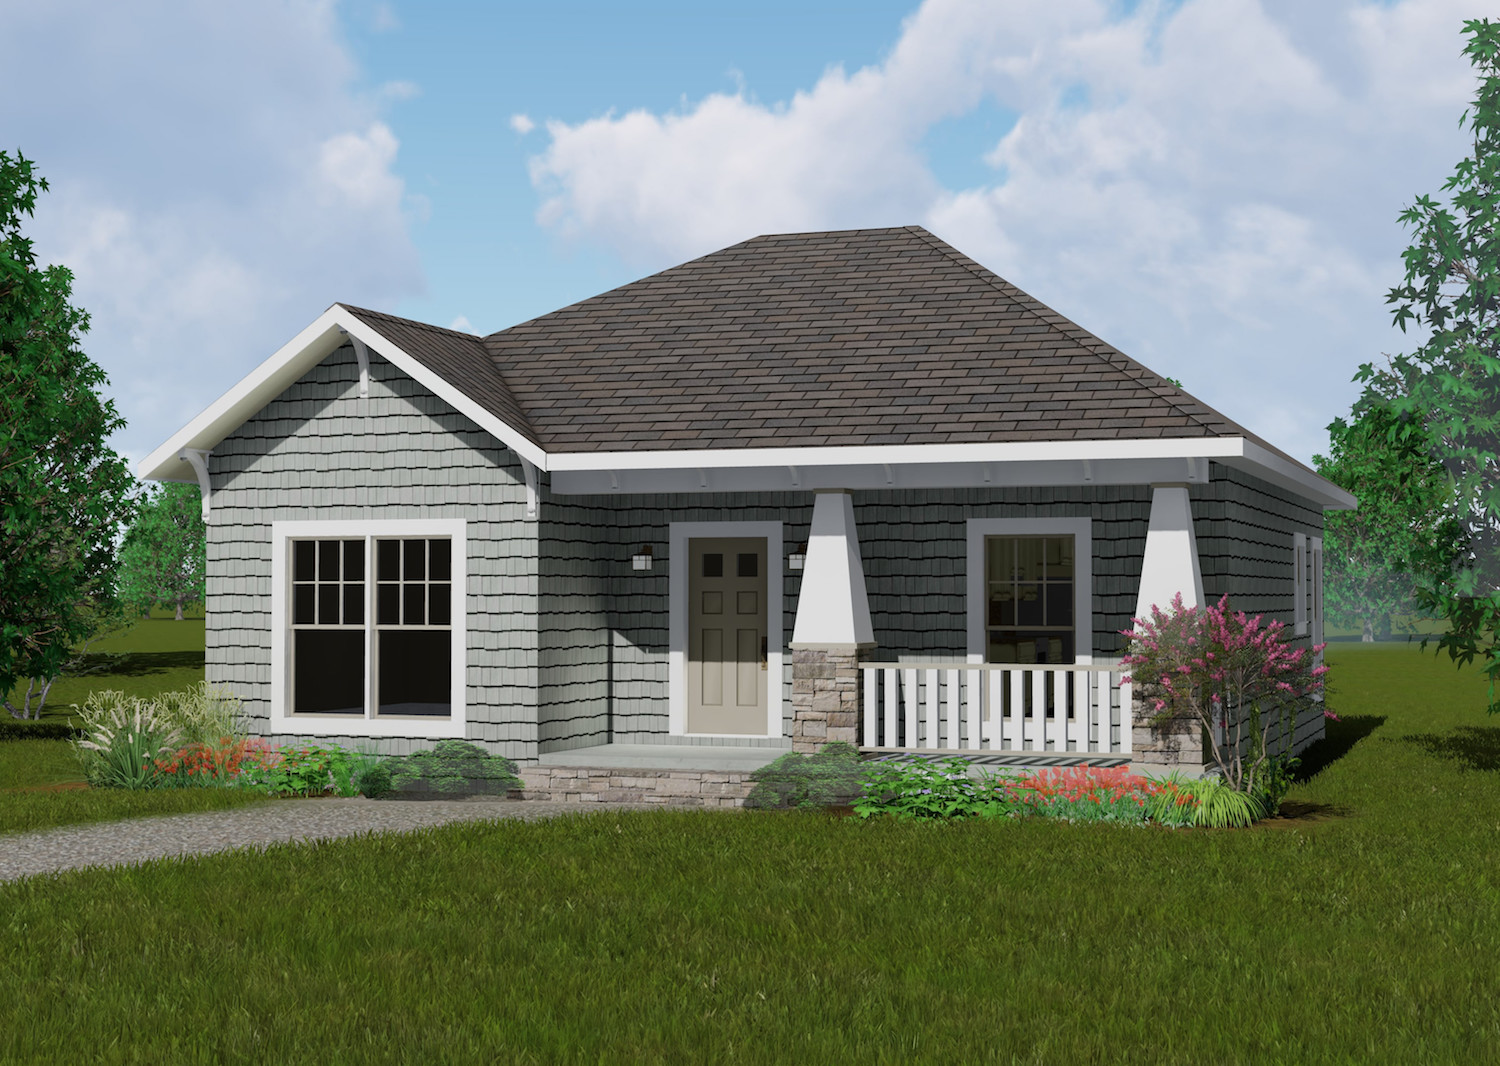 2 Bedrm 1073 Sq Ft Country House Plan 123 1083